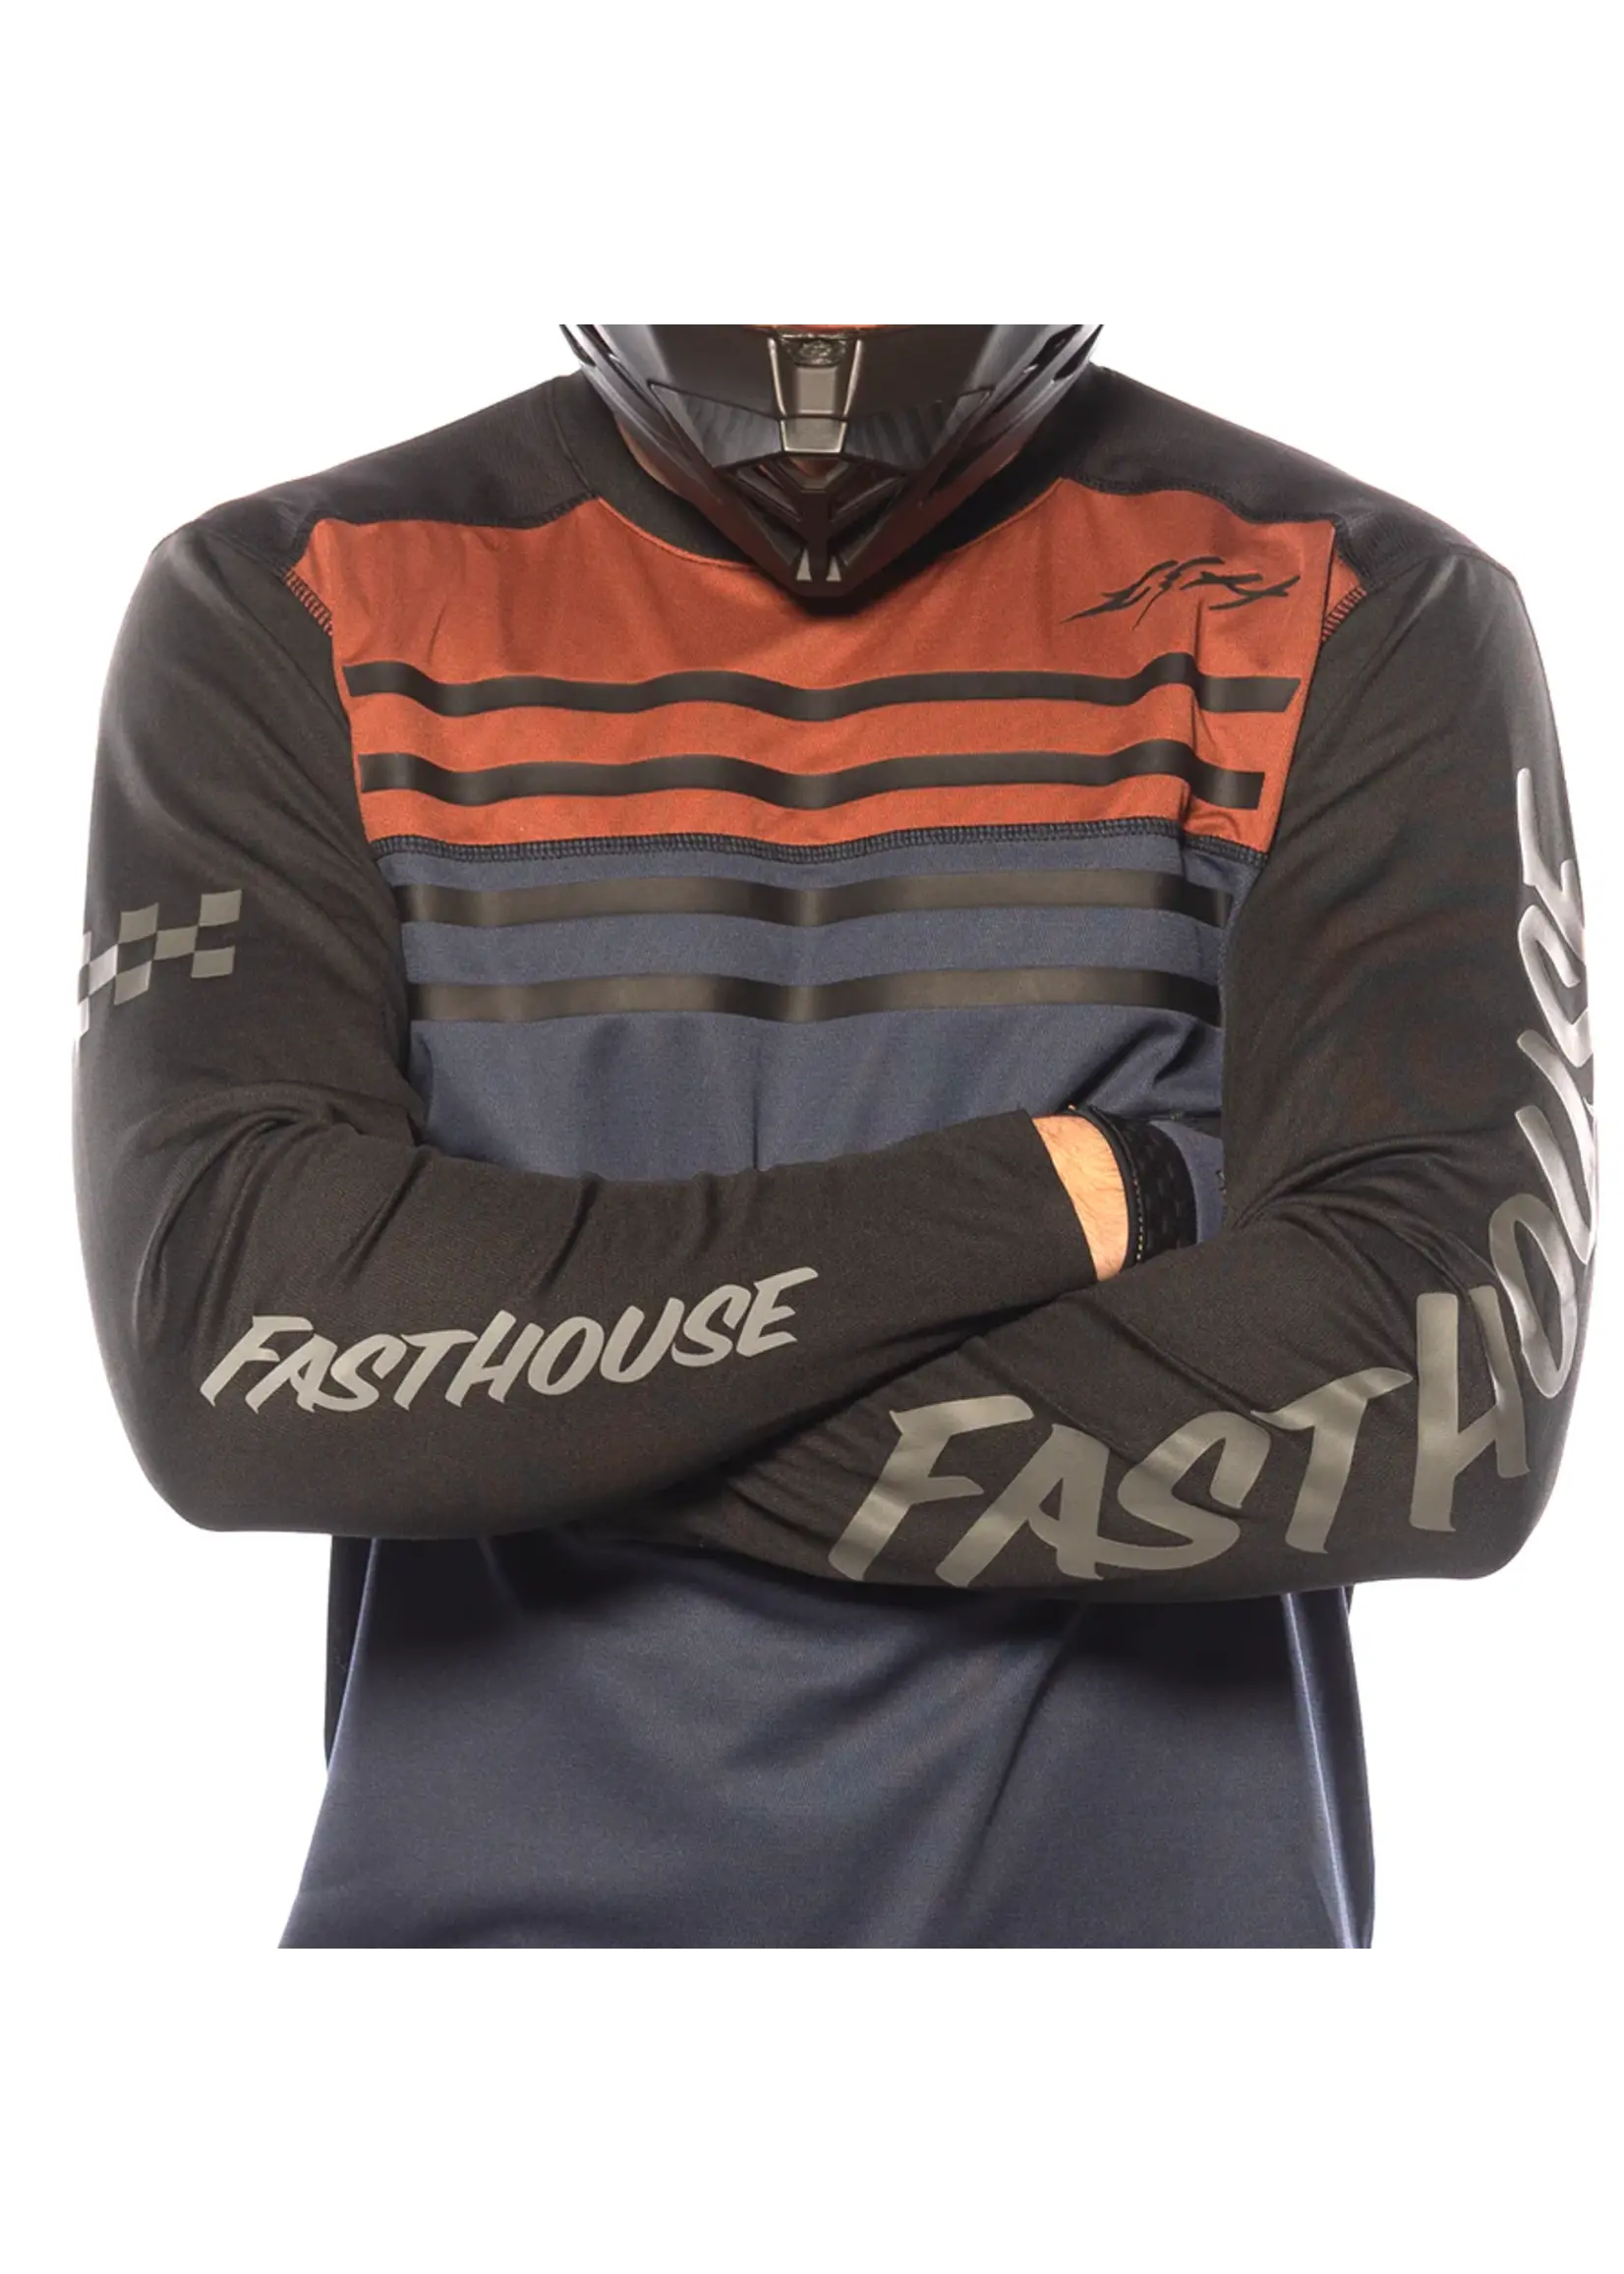 Fasthouse FASTHOUSE Sidewinder Alloy Long Sleeve Jersey Rust/Midnight Navy